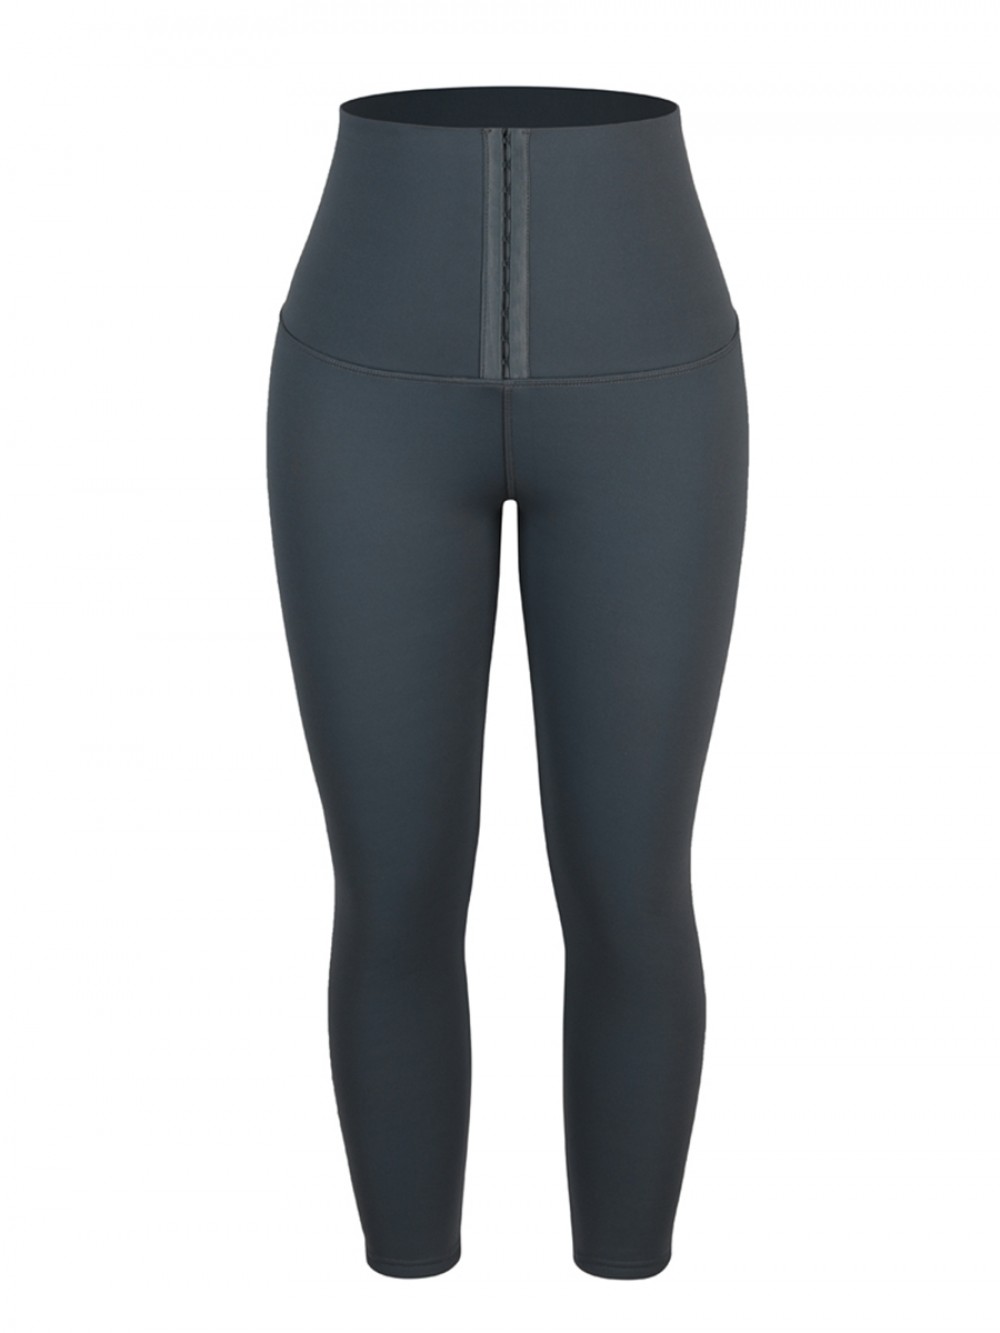 Gray Waist Trainer Leggings With Hooks Highest Compression